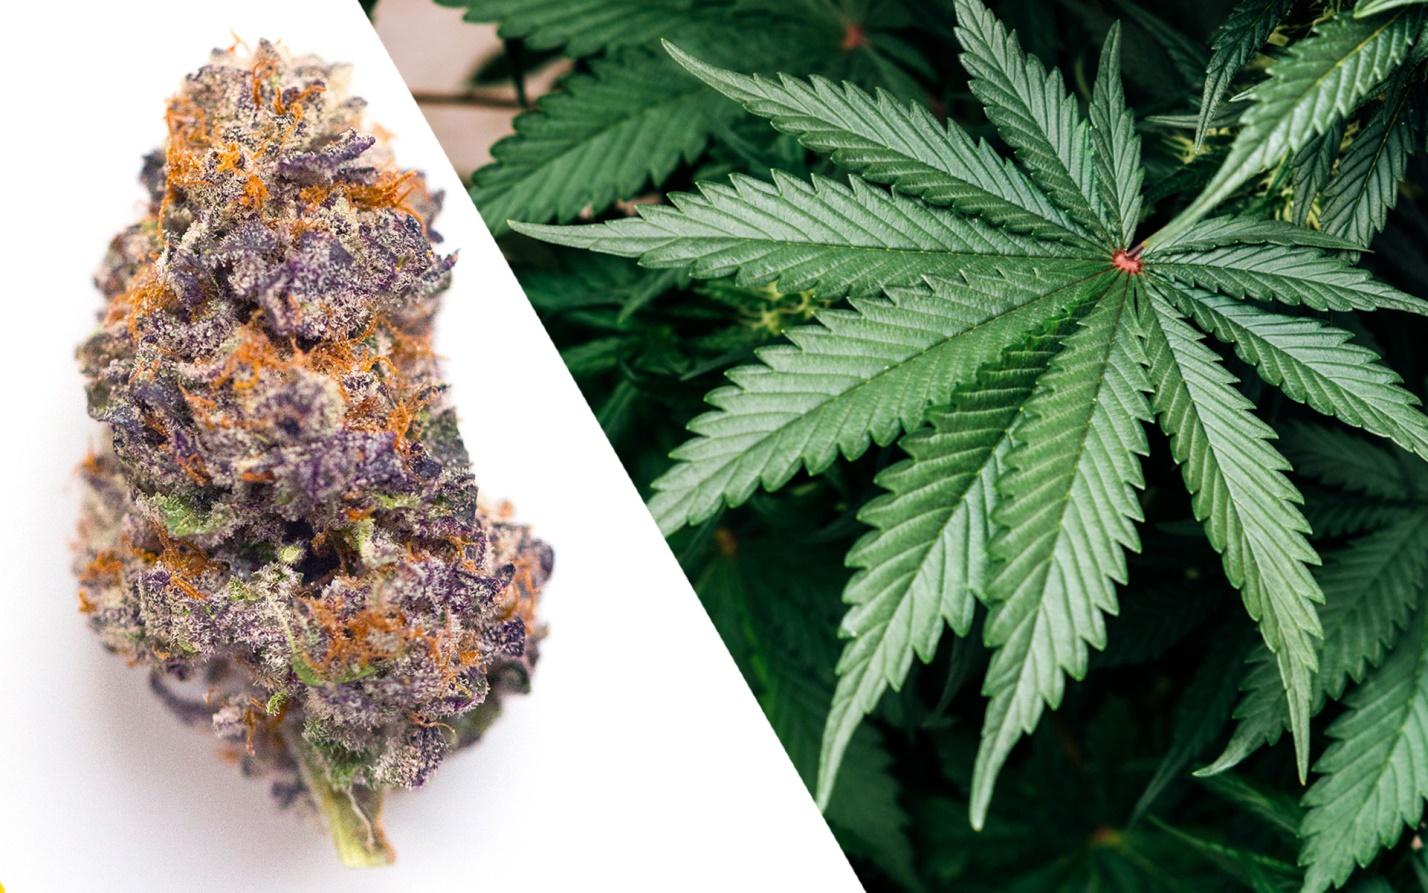 Conditions and Illnesses That Can Benefit From Cannabis